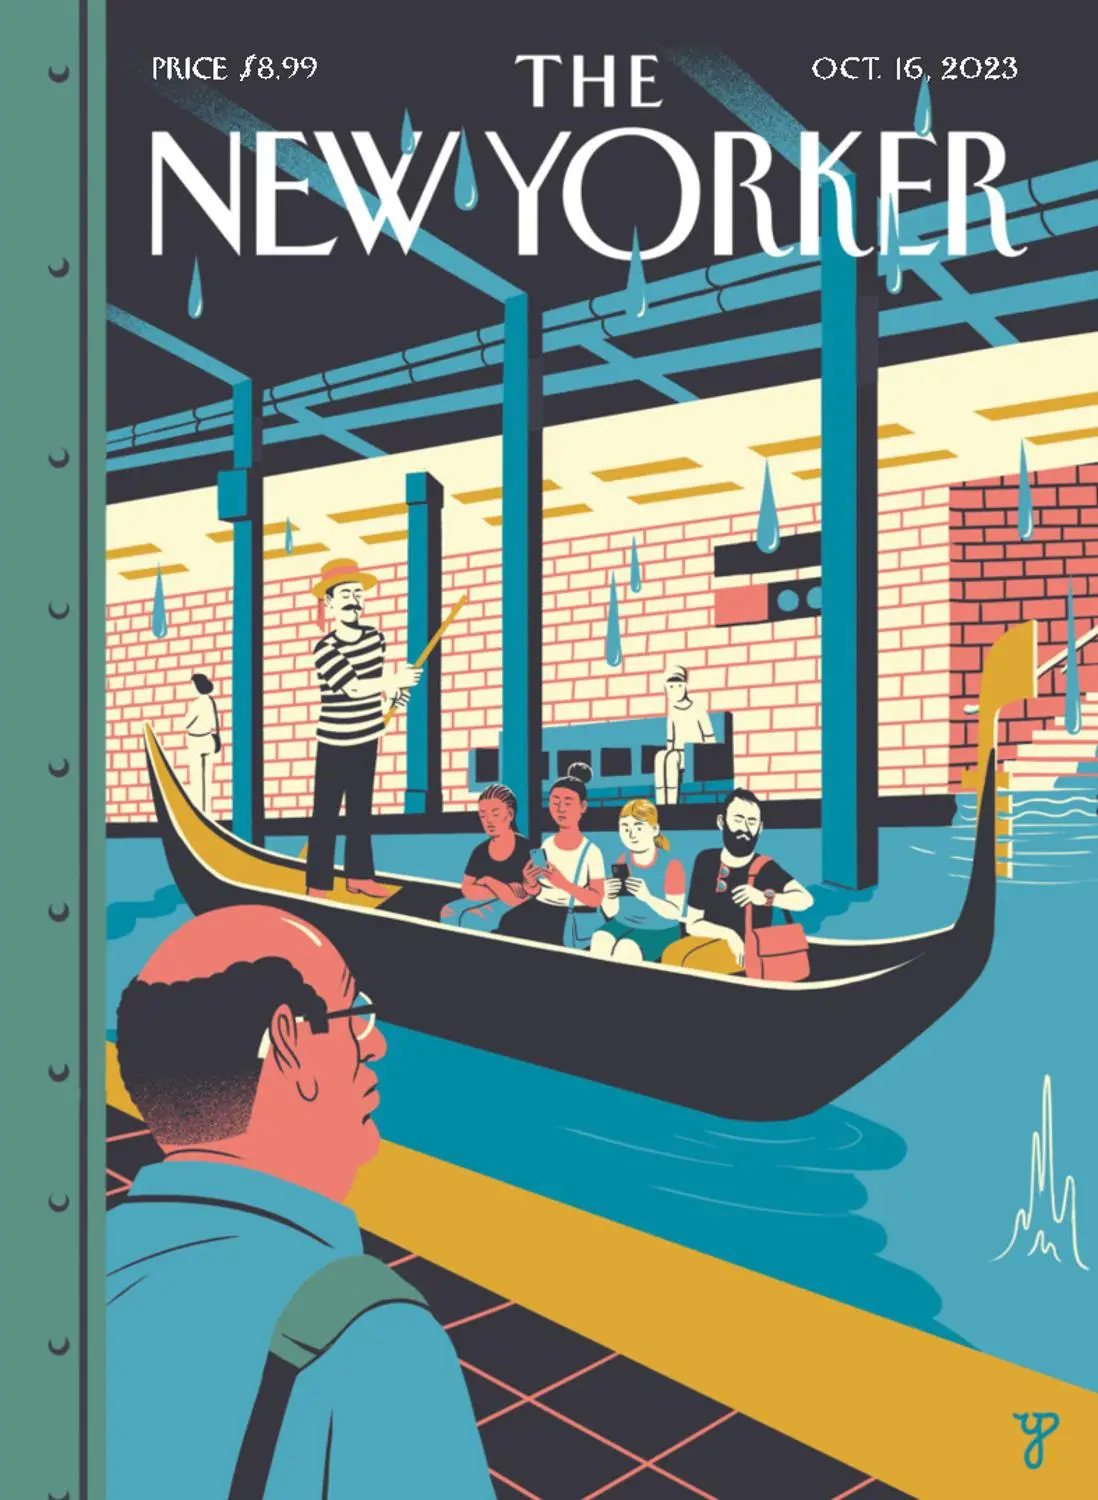 The New Yorker October 16, 2023 / AvaxHome